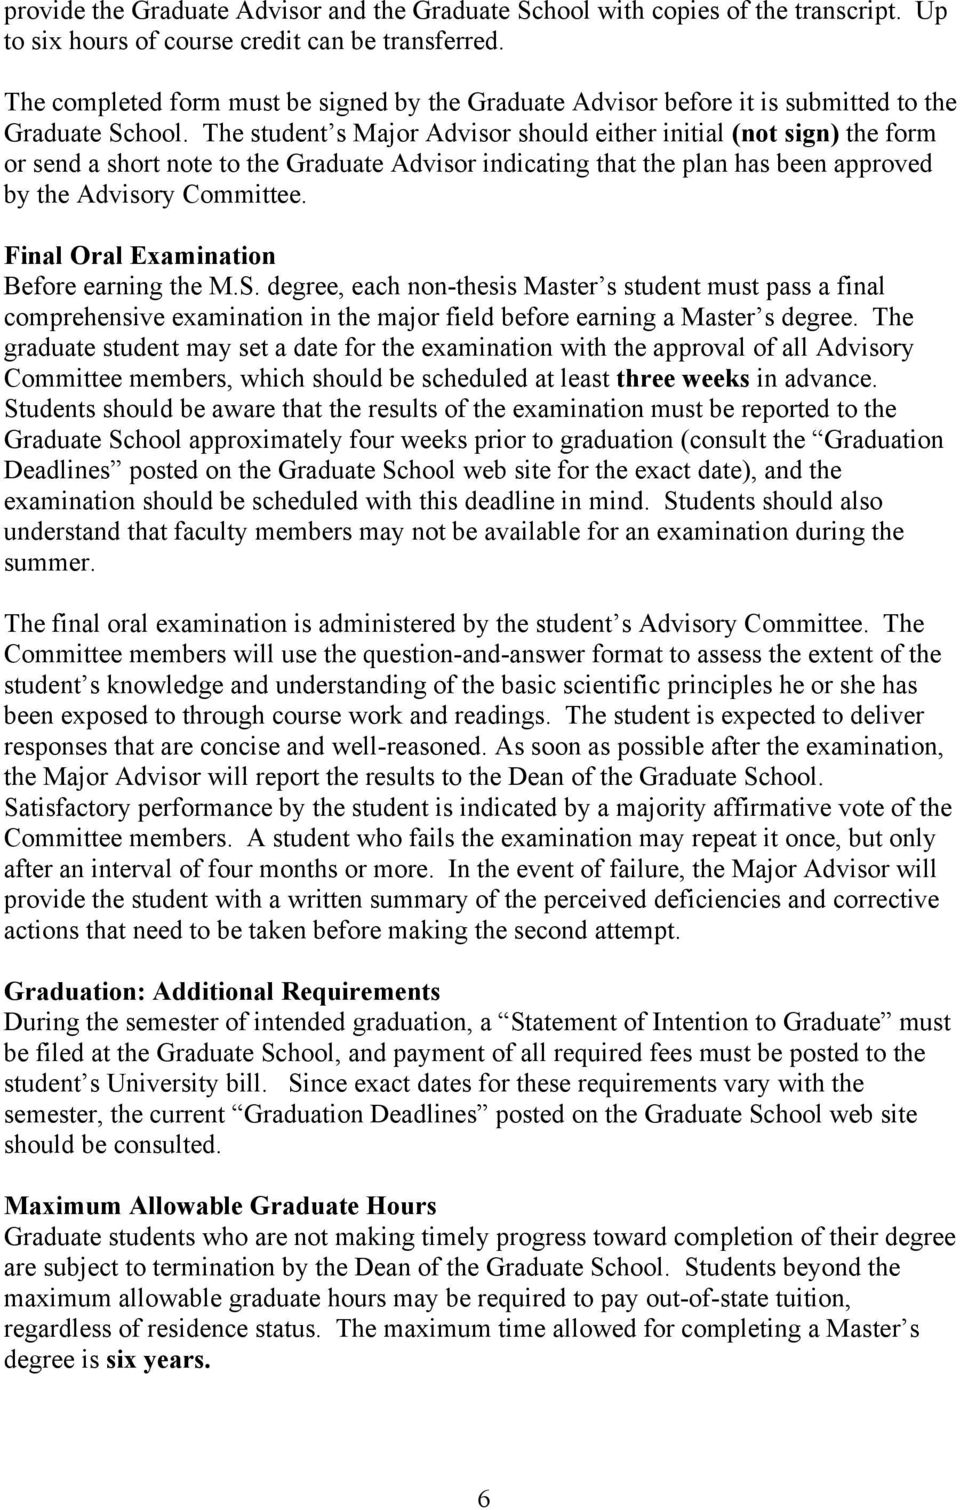 The student s Major Advisor should either initial (not sign) the form or send a short note to the Graduate Advisor indicating that the plan has been approved by the Advisory Committee.